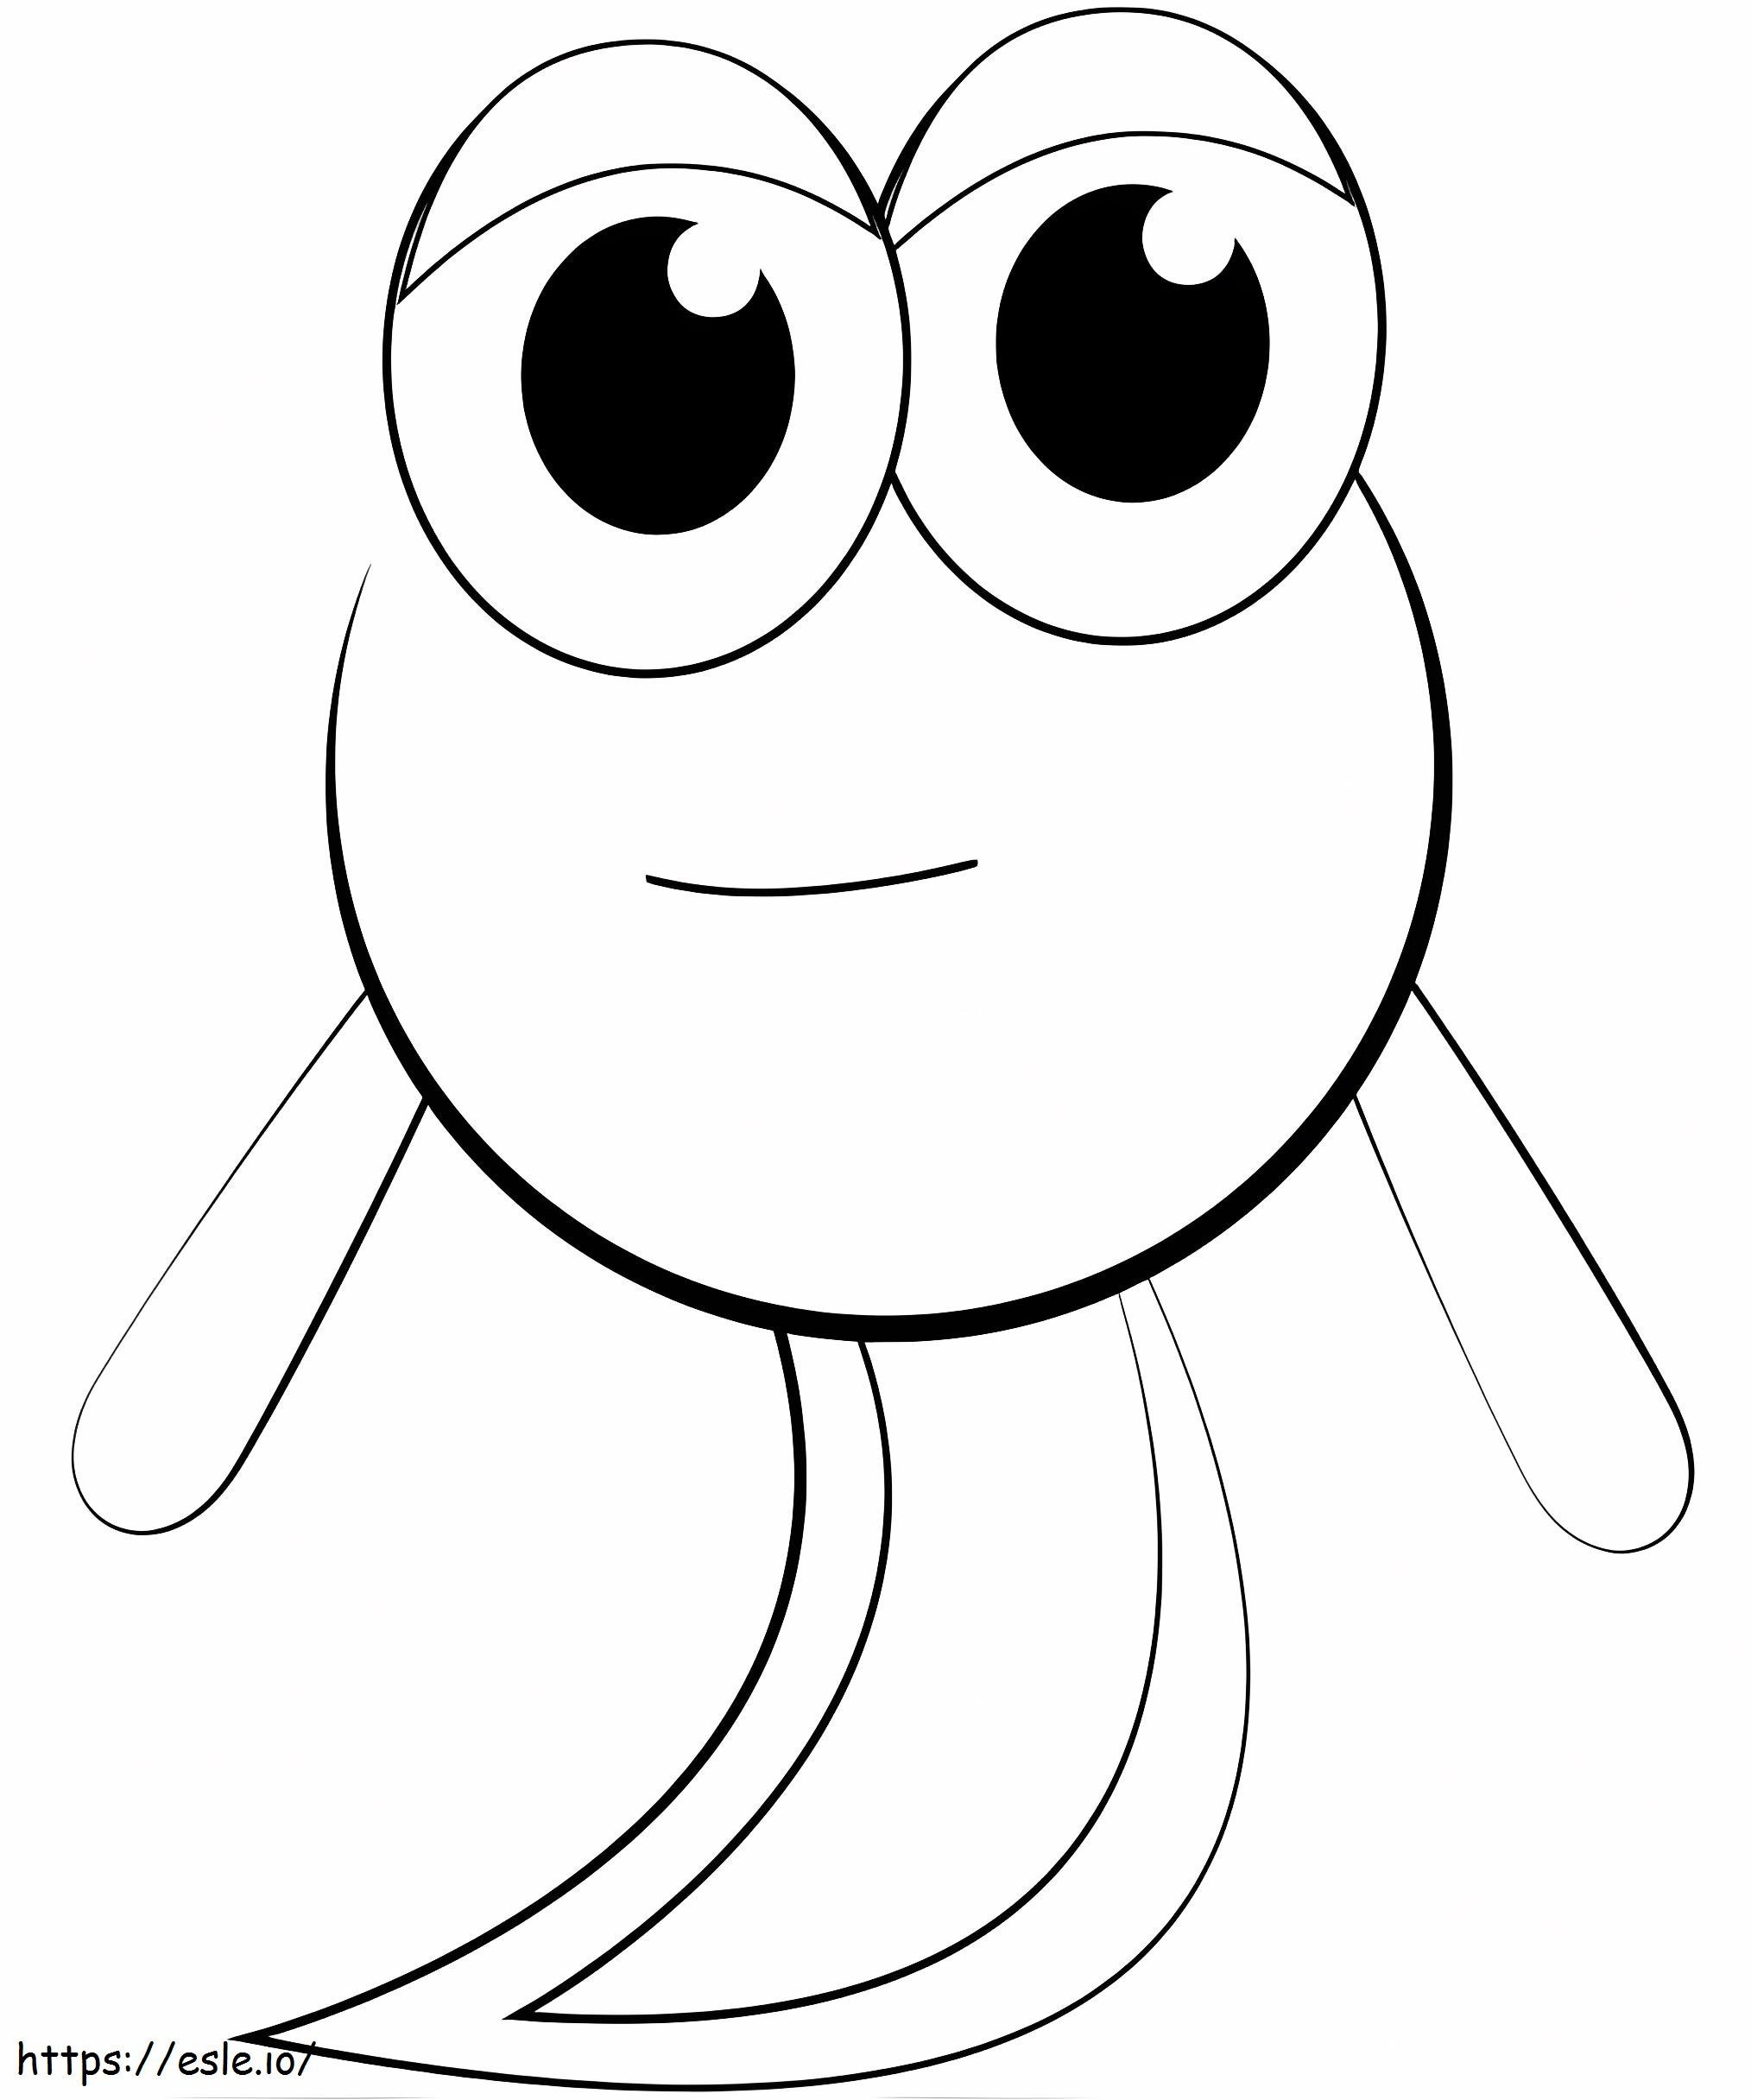 1559791089 Cartoon Frog A4 coloring page